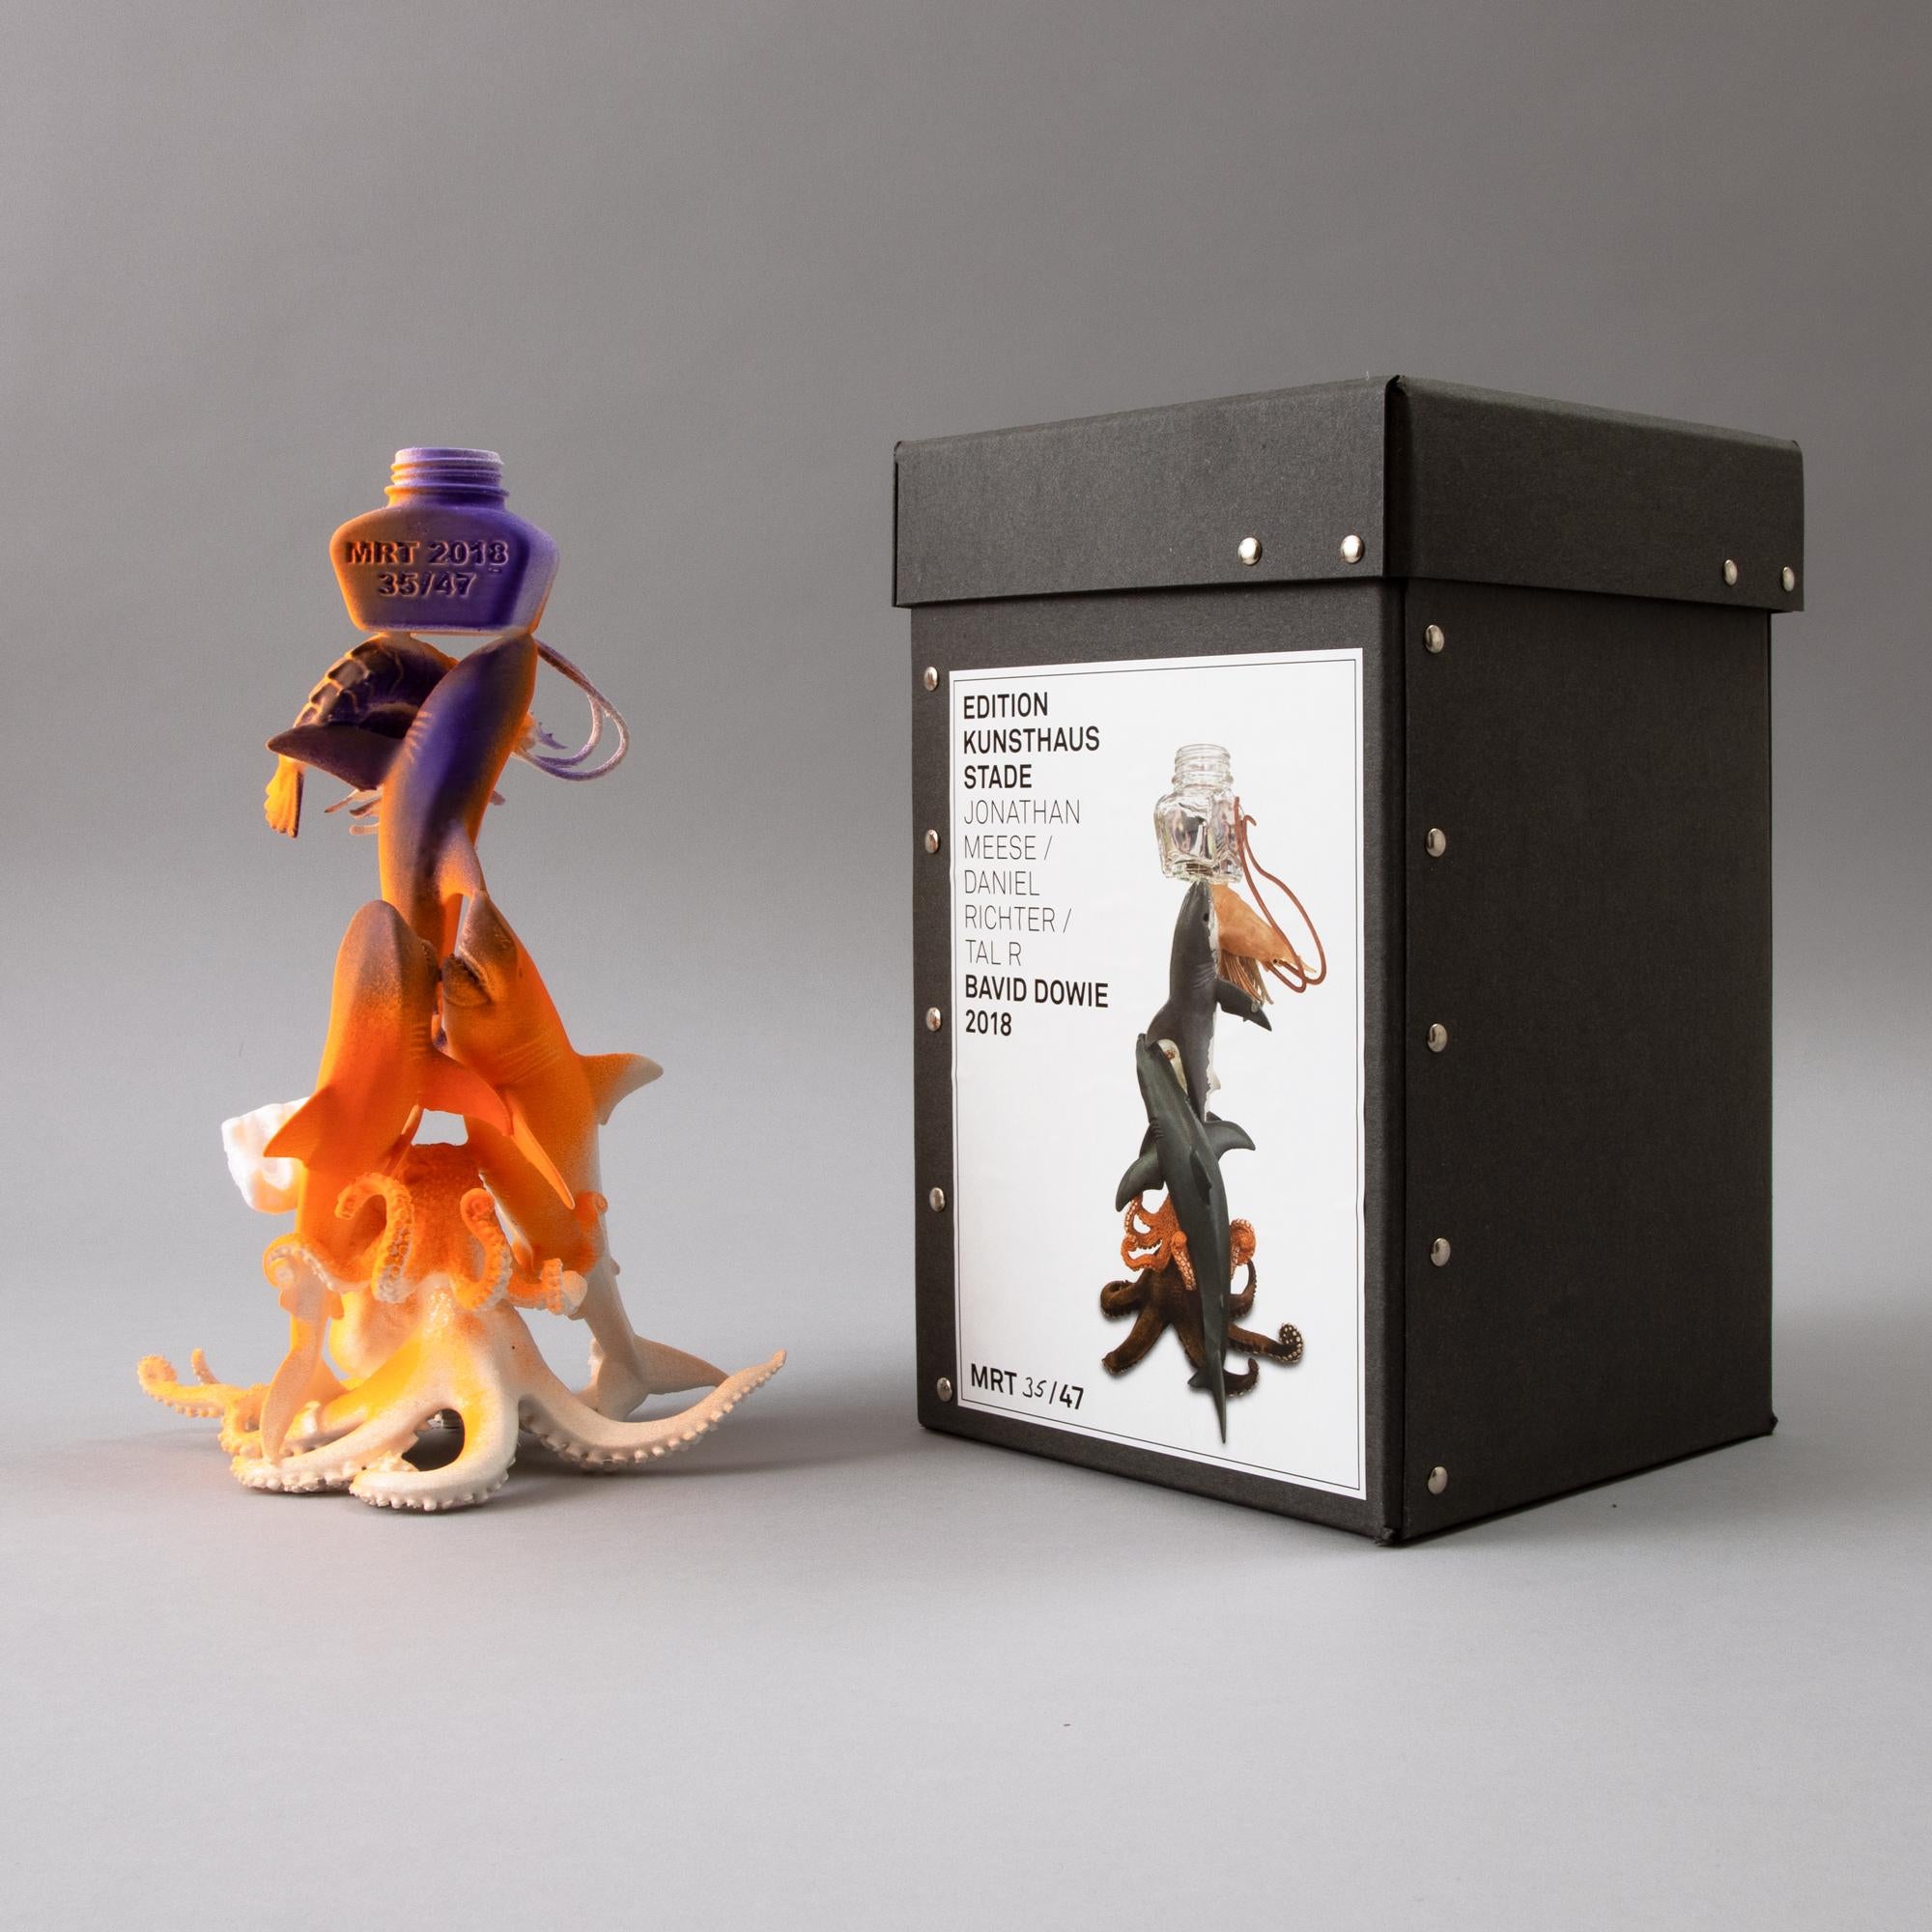 Bavid Dowie: Collaboration Sculpture by Daniel Richter, Jonathan Meese and Tal R For Sale 1